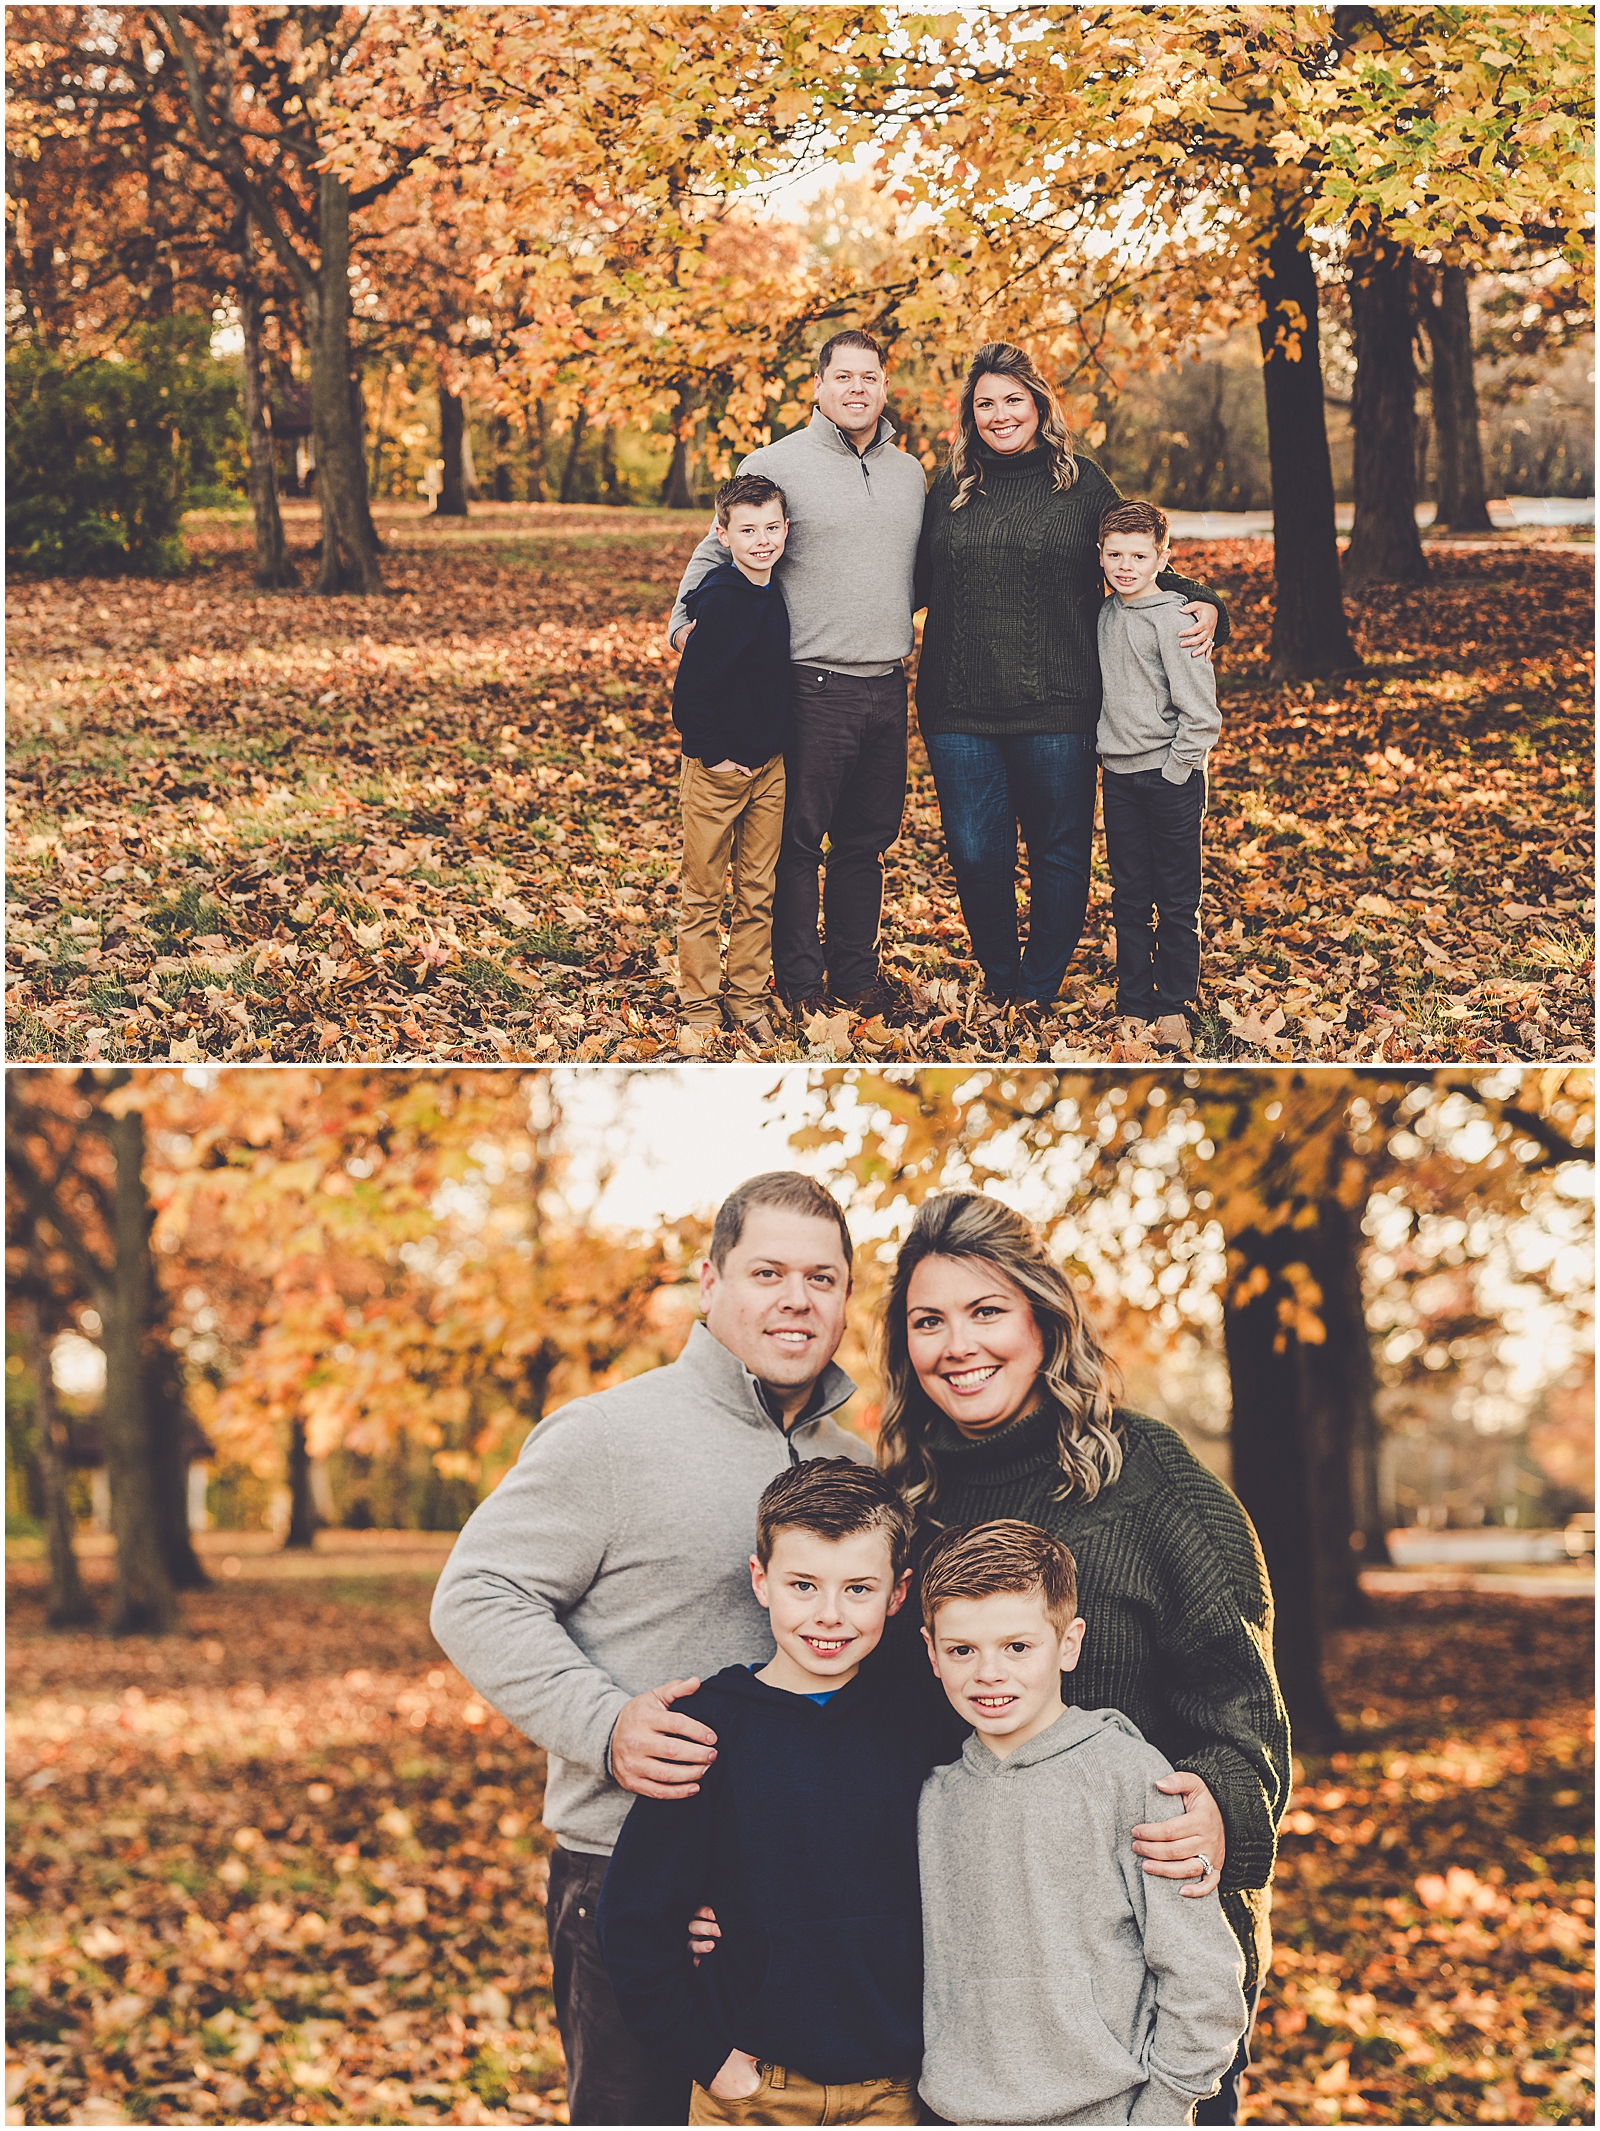 Iroquois County family photographer in Watseka for the Knapp family with Kankakee County family photographer Kara Evans Photographer.